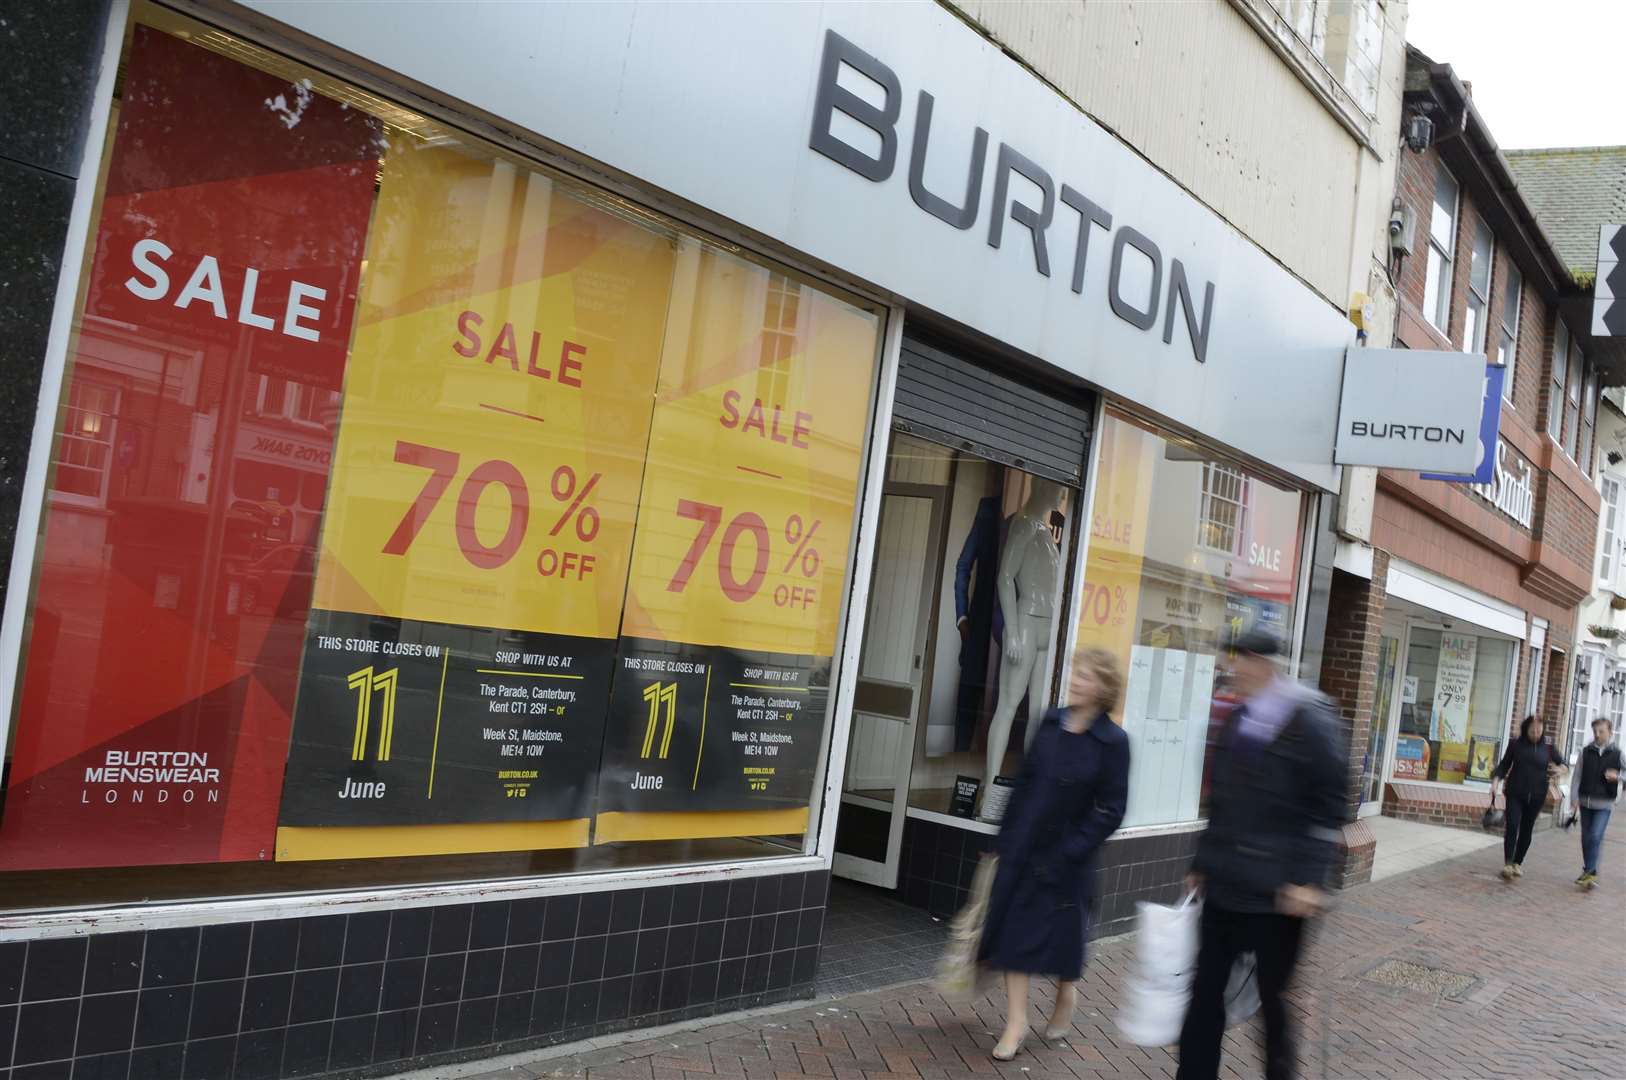 Burton is one of the brands which could be sold to Boohoo from the former Arcadia empire